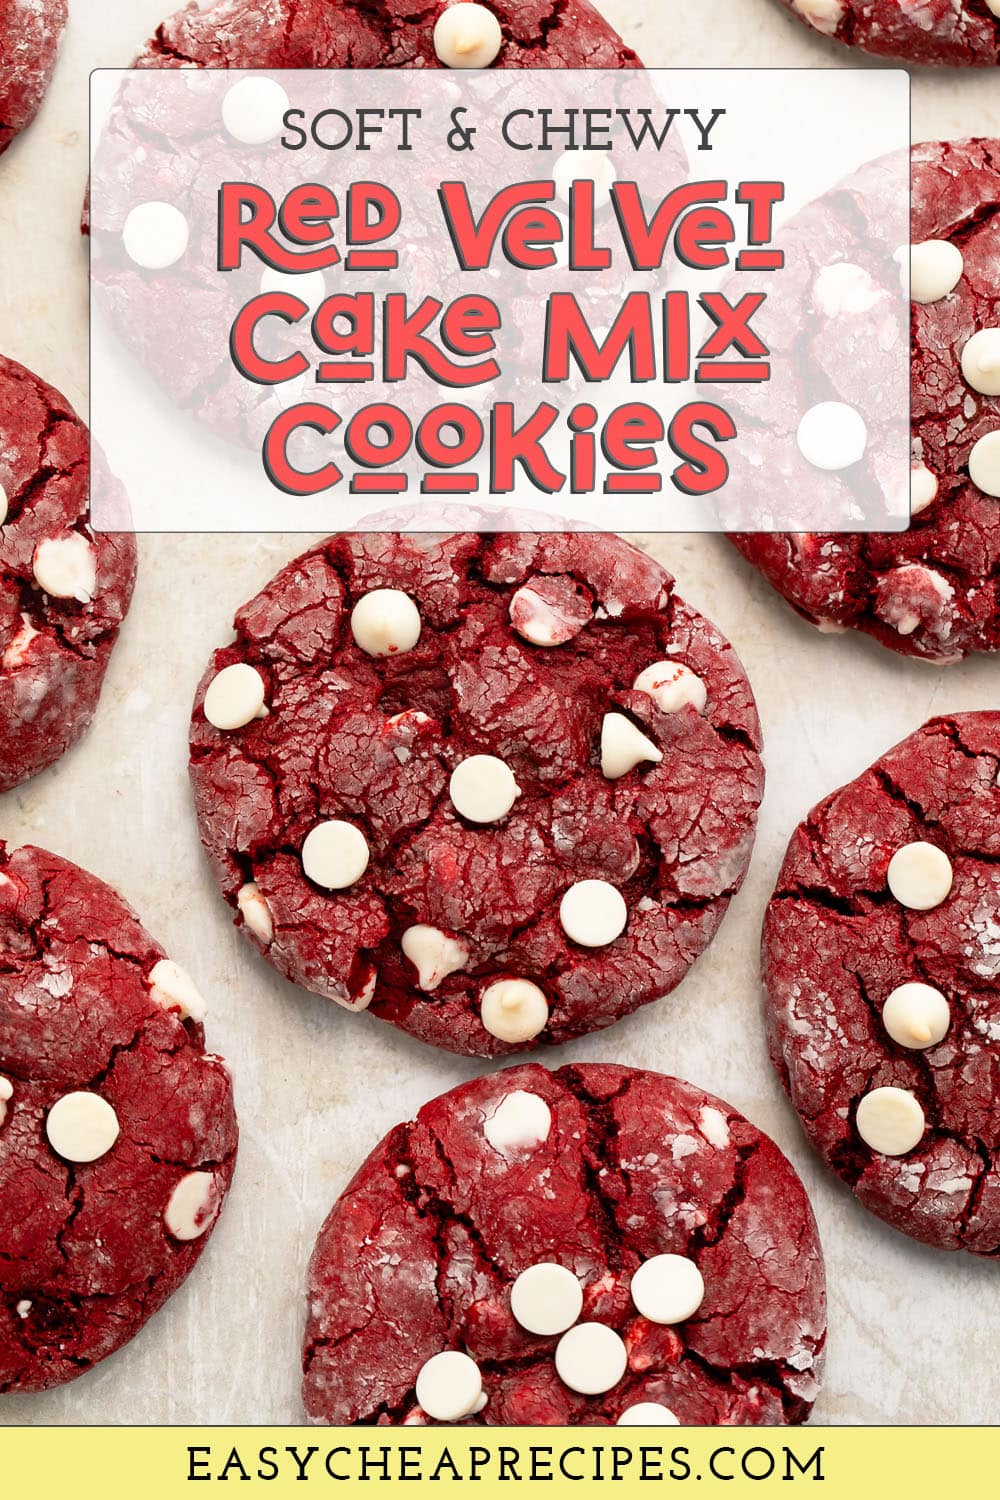 Pin graphic for red velvet cake mix cookies.